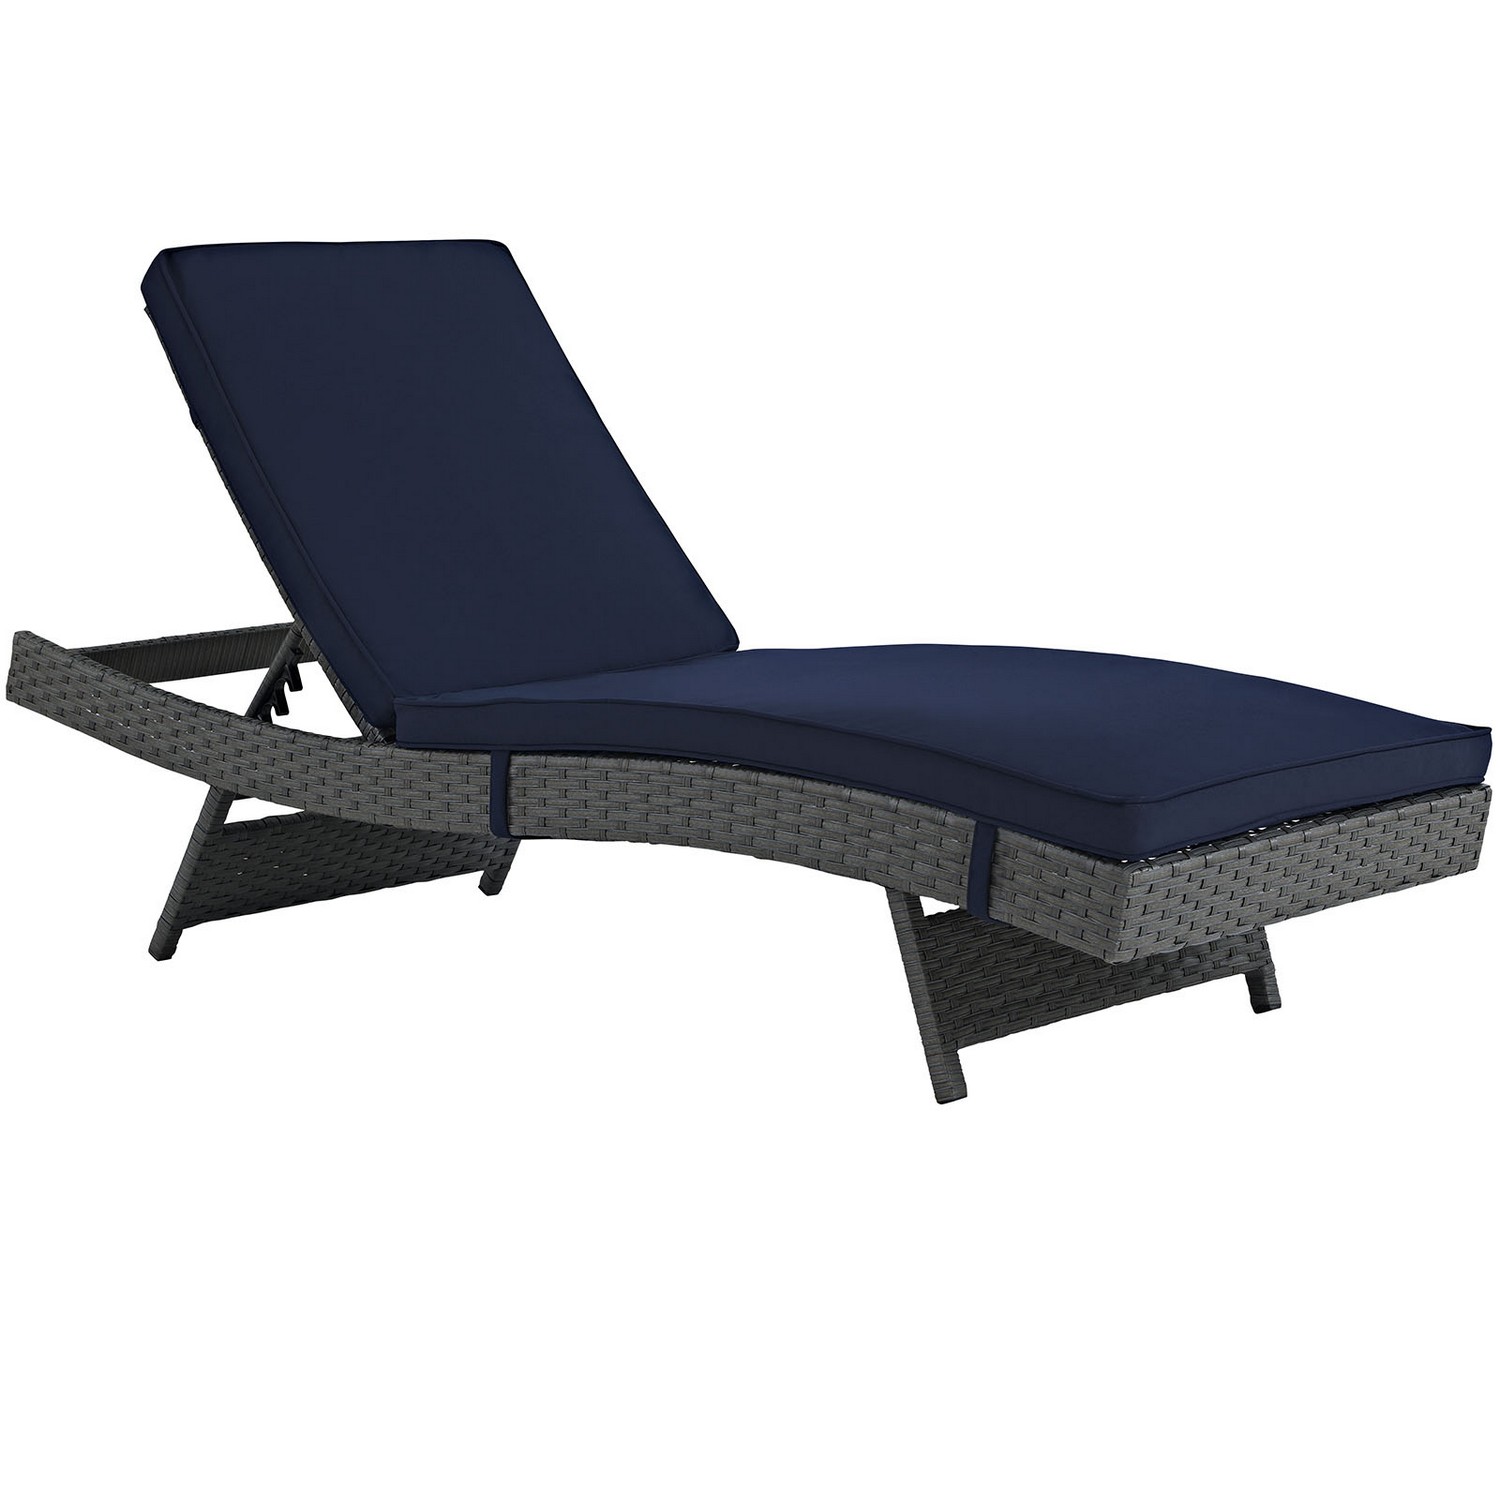 Modway Sojourn Outdoor Patio Sunbrella Chaise - Canvas Navy